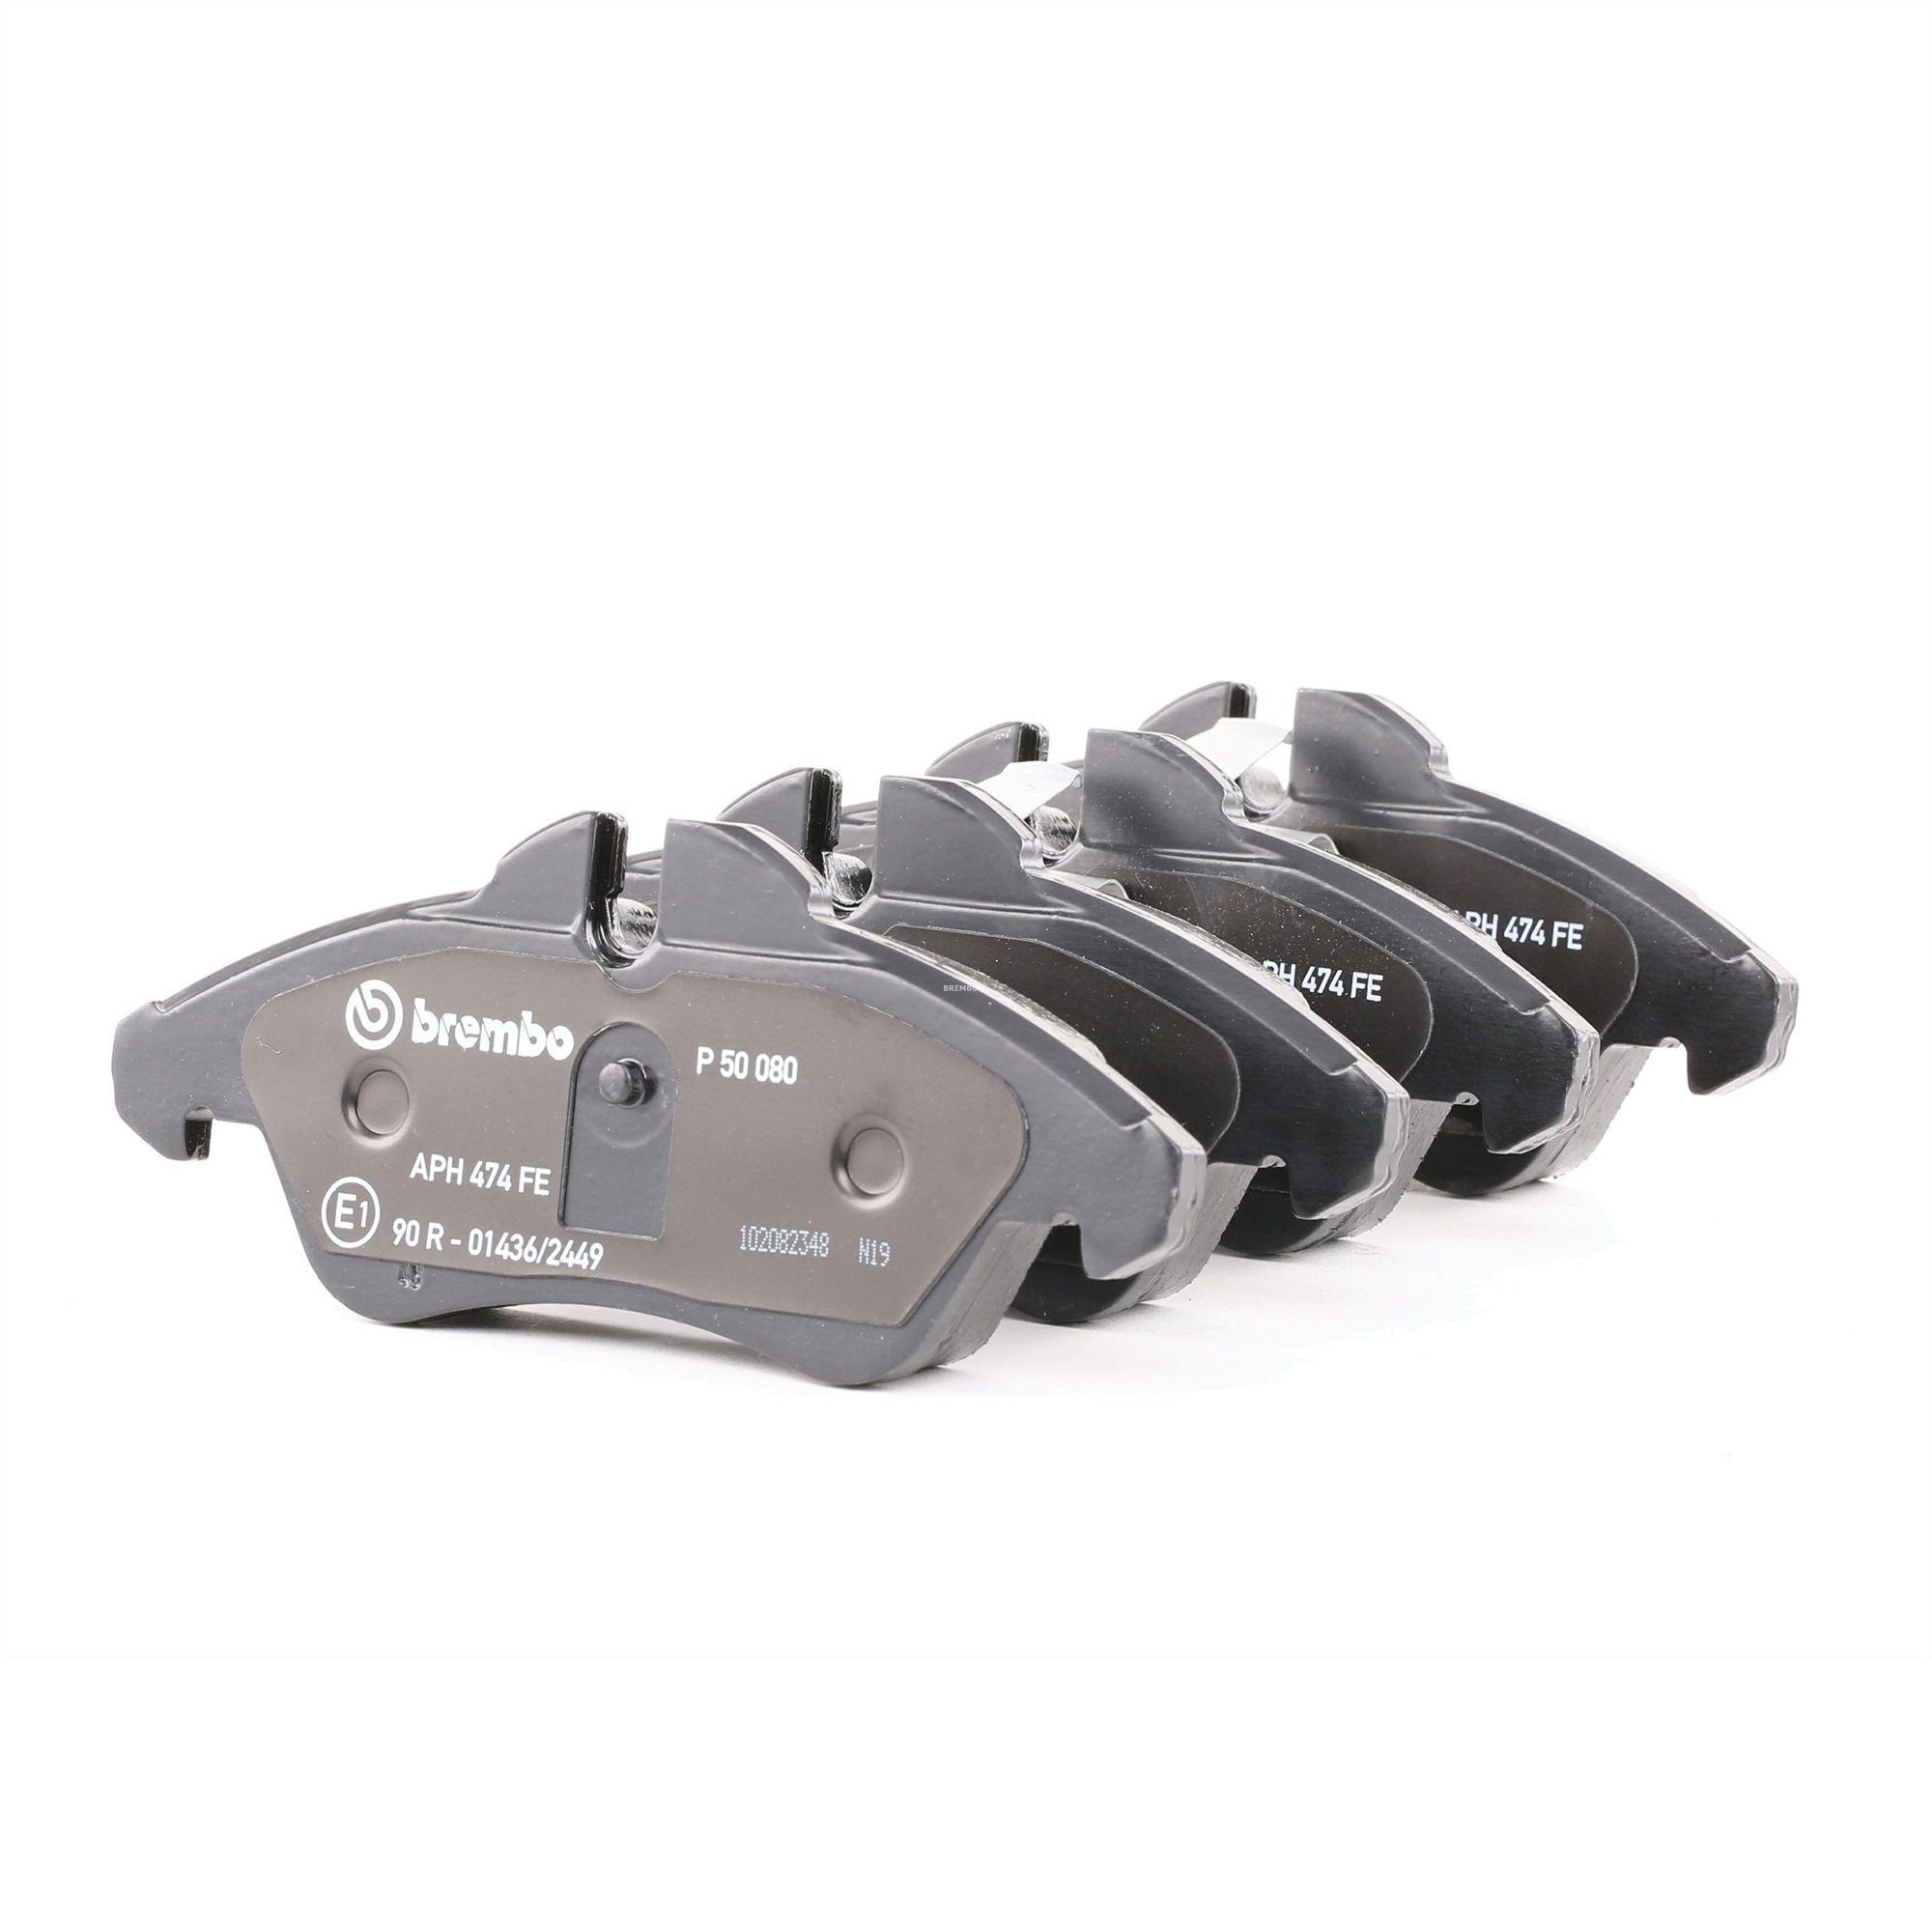 BREMBO P 50 080 Brake pad set incl. wear warning contact, with piston clip, without accessories